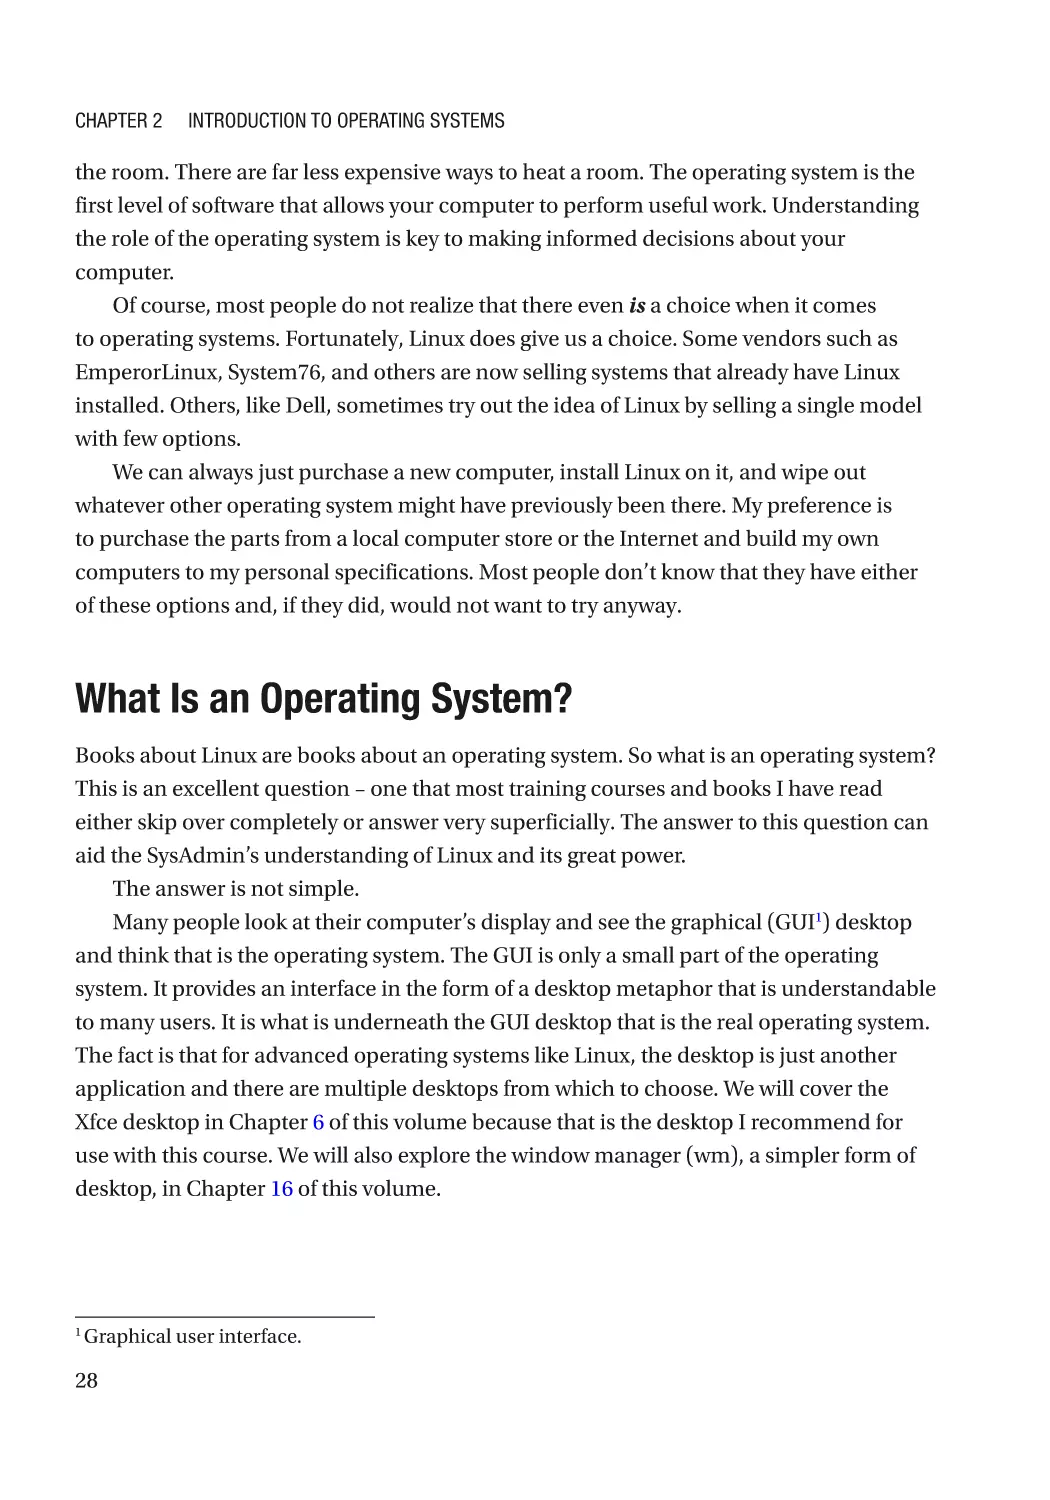 What Is an Operating System?